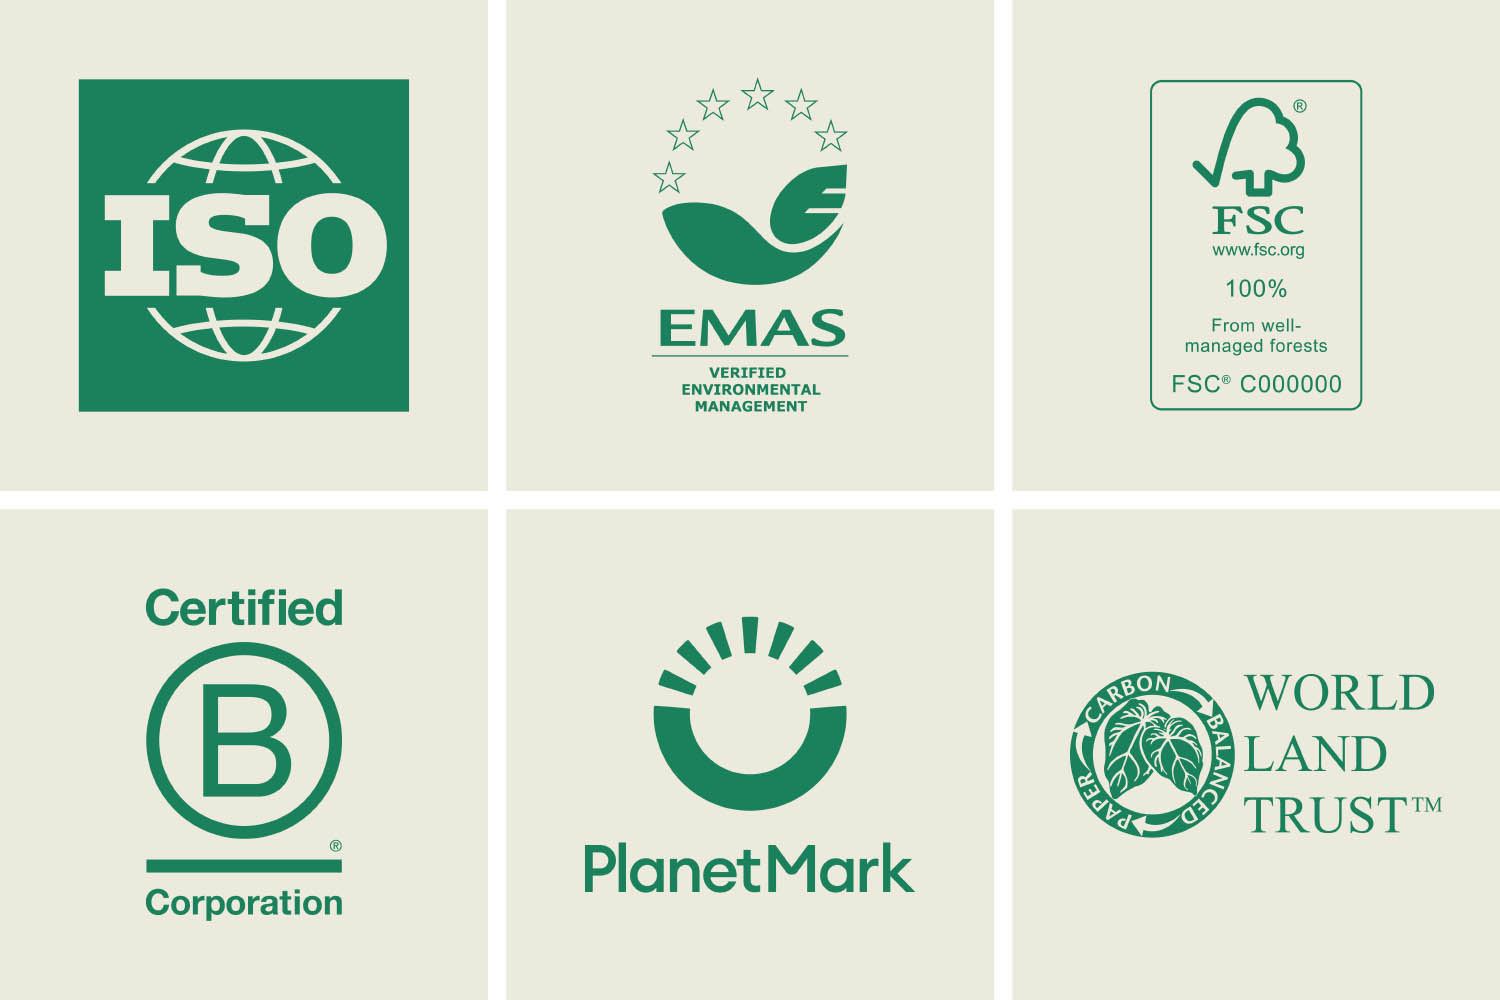 A selection of logos from the organisations mentioned in the text